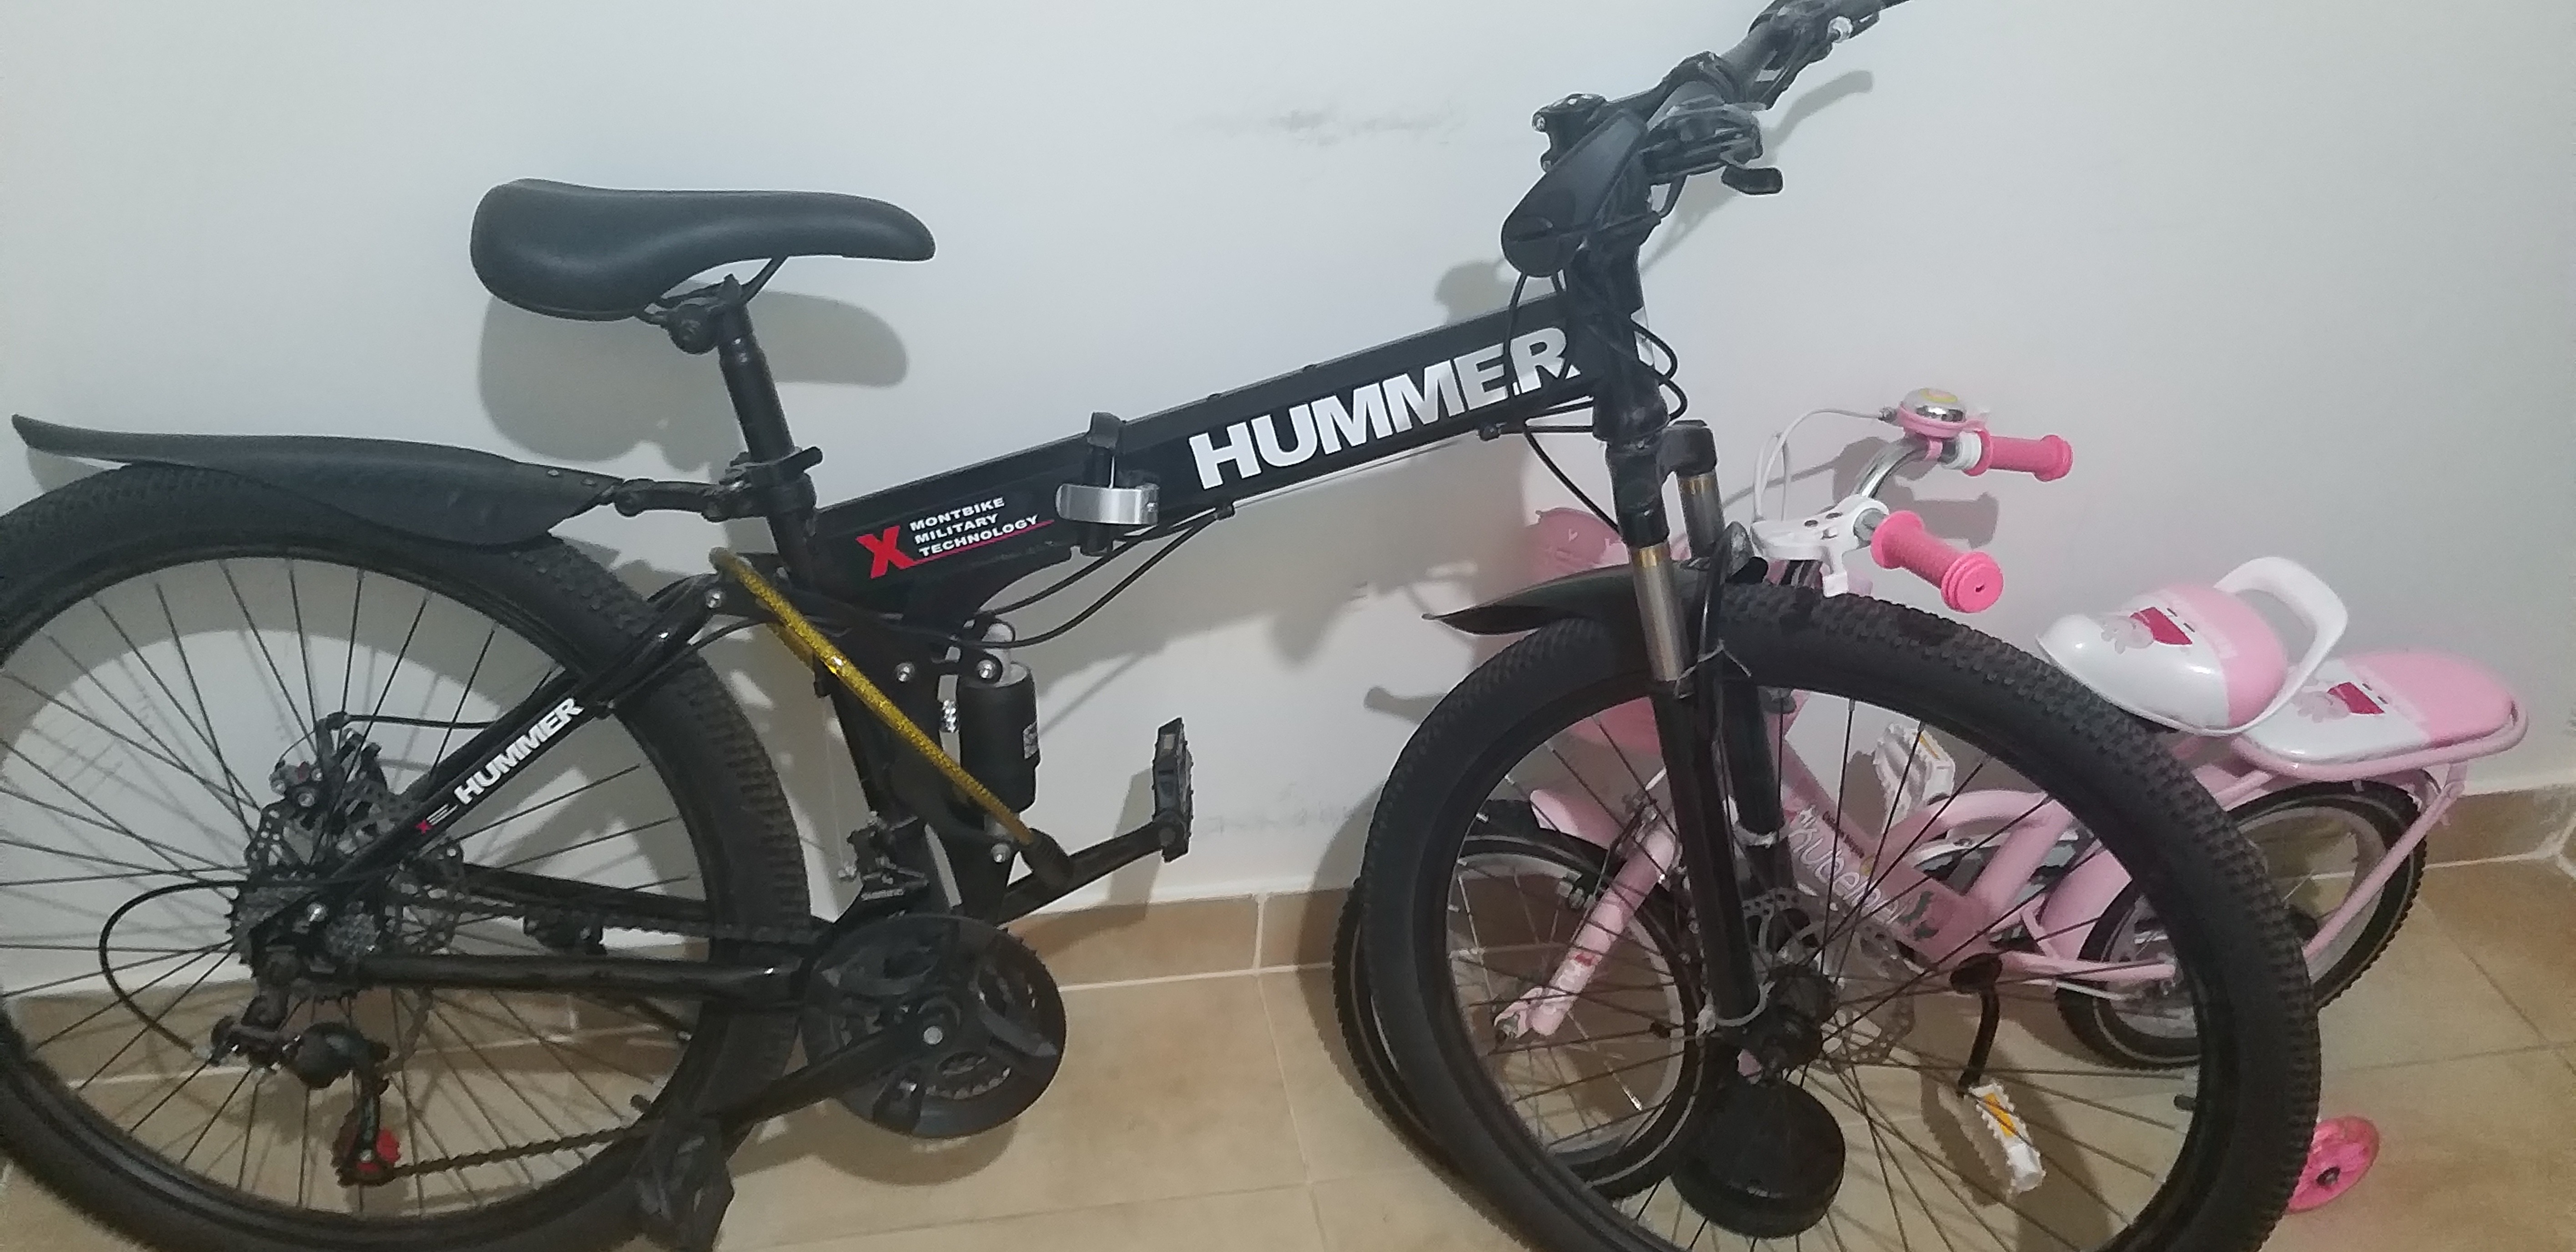 Hummer bicycle new